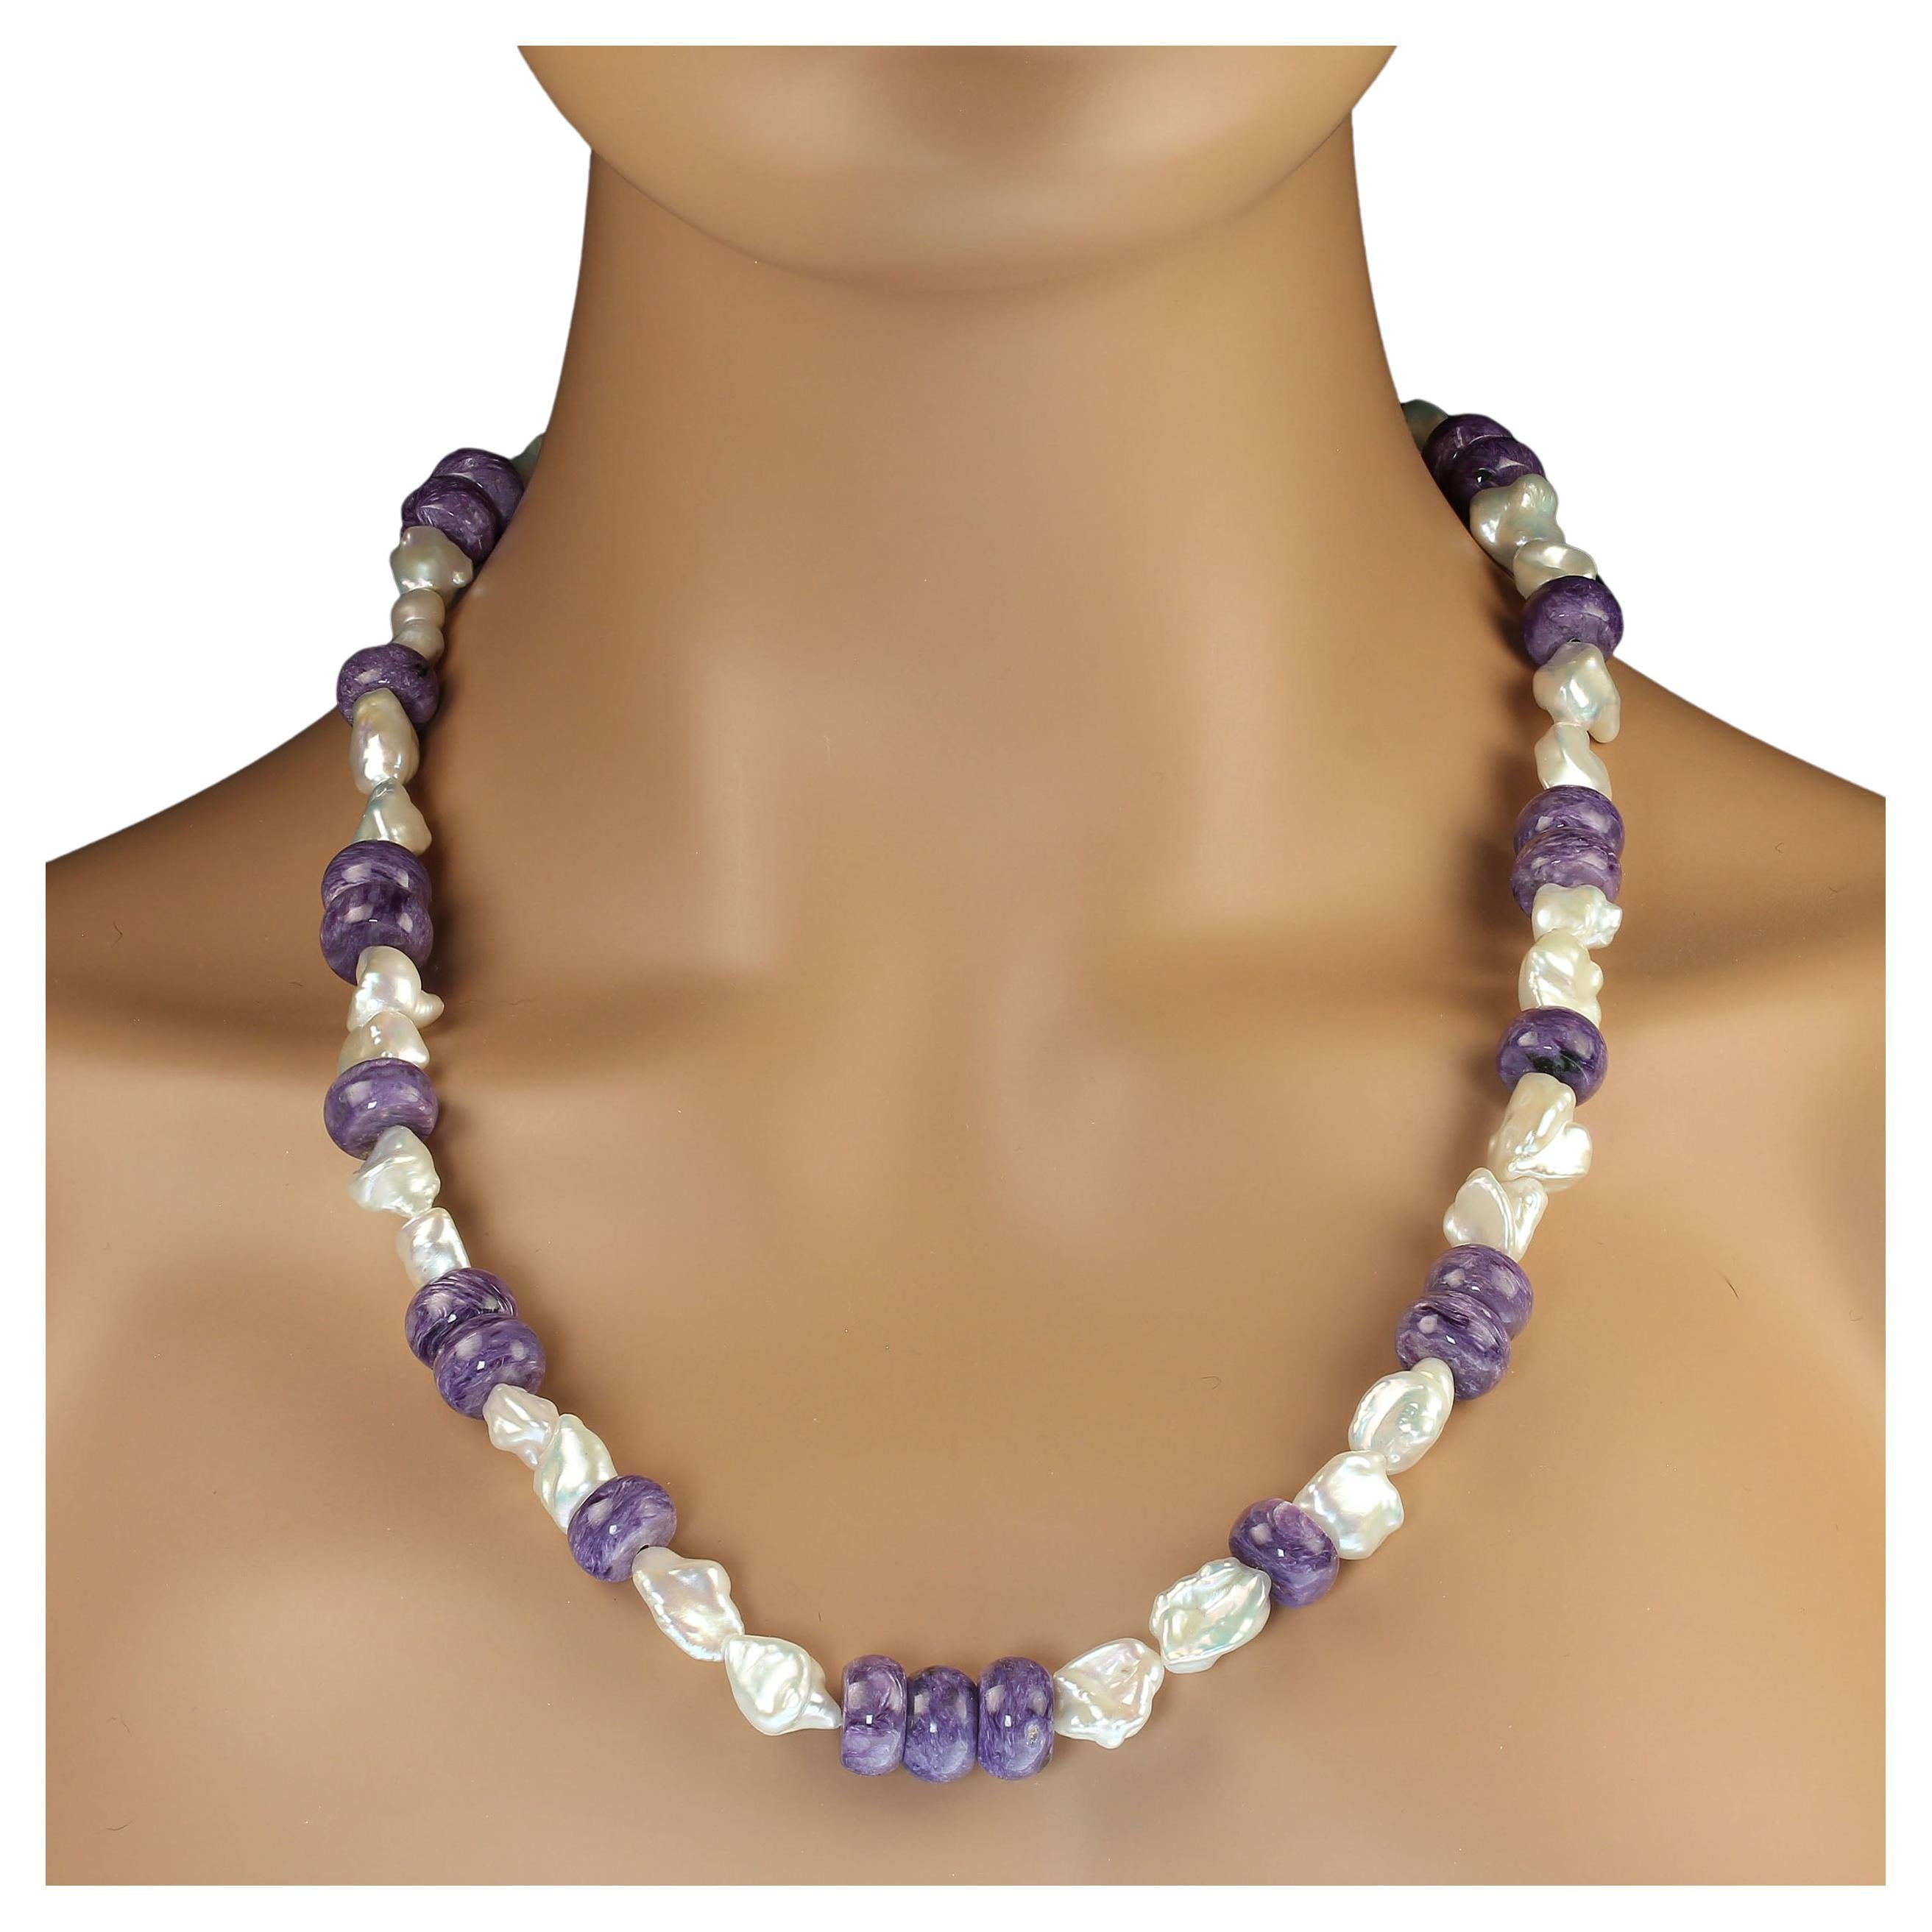 24-25 Inch Expandable necklace of creamy white freshwater pearls of interesting shapes and smooth purple Charoite rondelles.  These iridescent pearls juxtapose with the purple Charoite for an elegant fresh look in a pearl necklace. Wear this